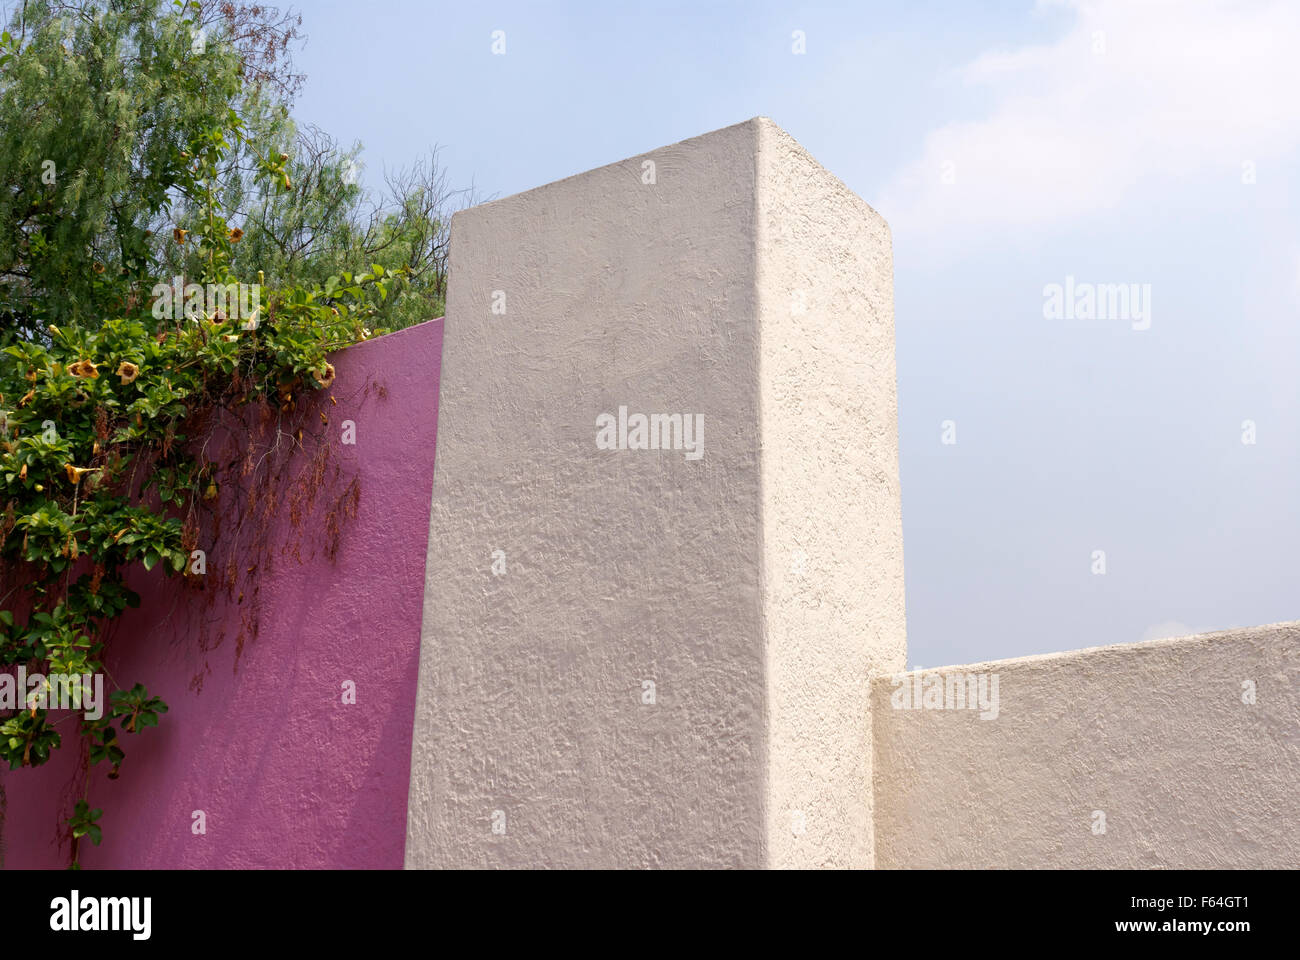 Colorful exterior walls of the Museo Casa Luis Barragán house museum in Mexico City Stock Photo